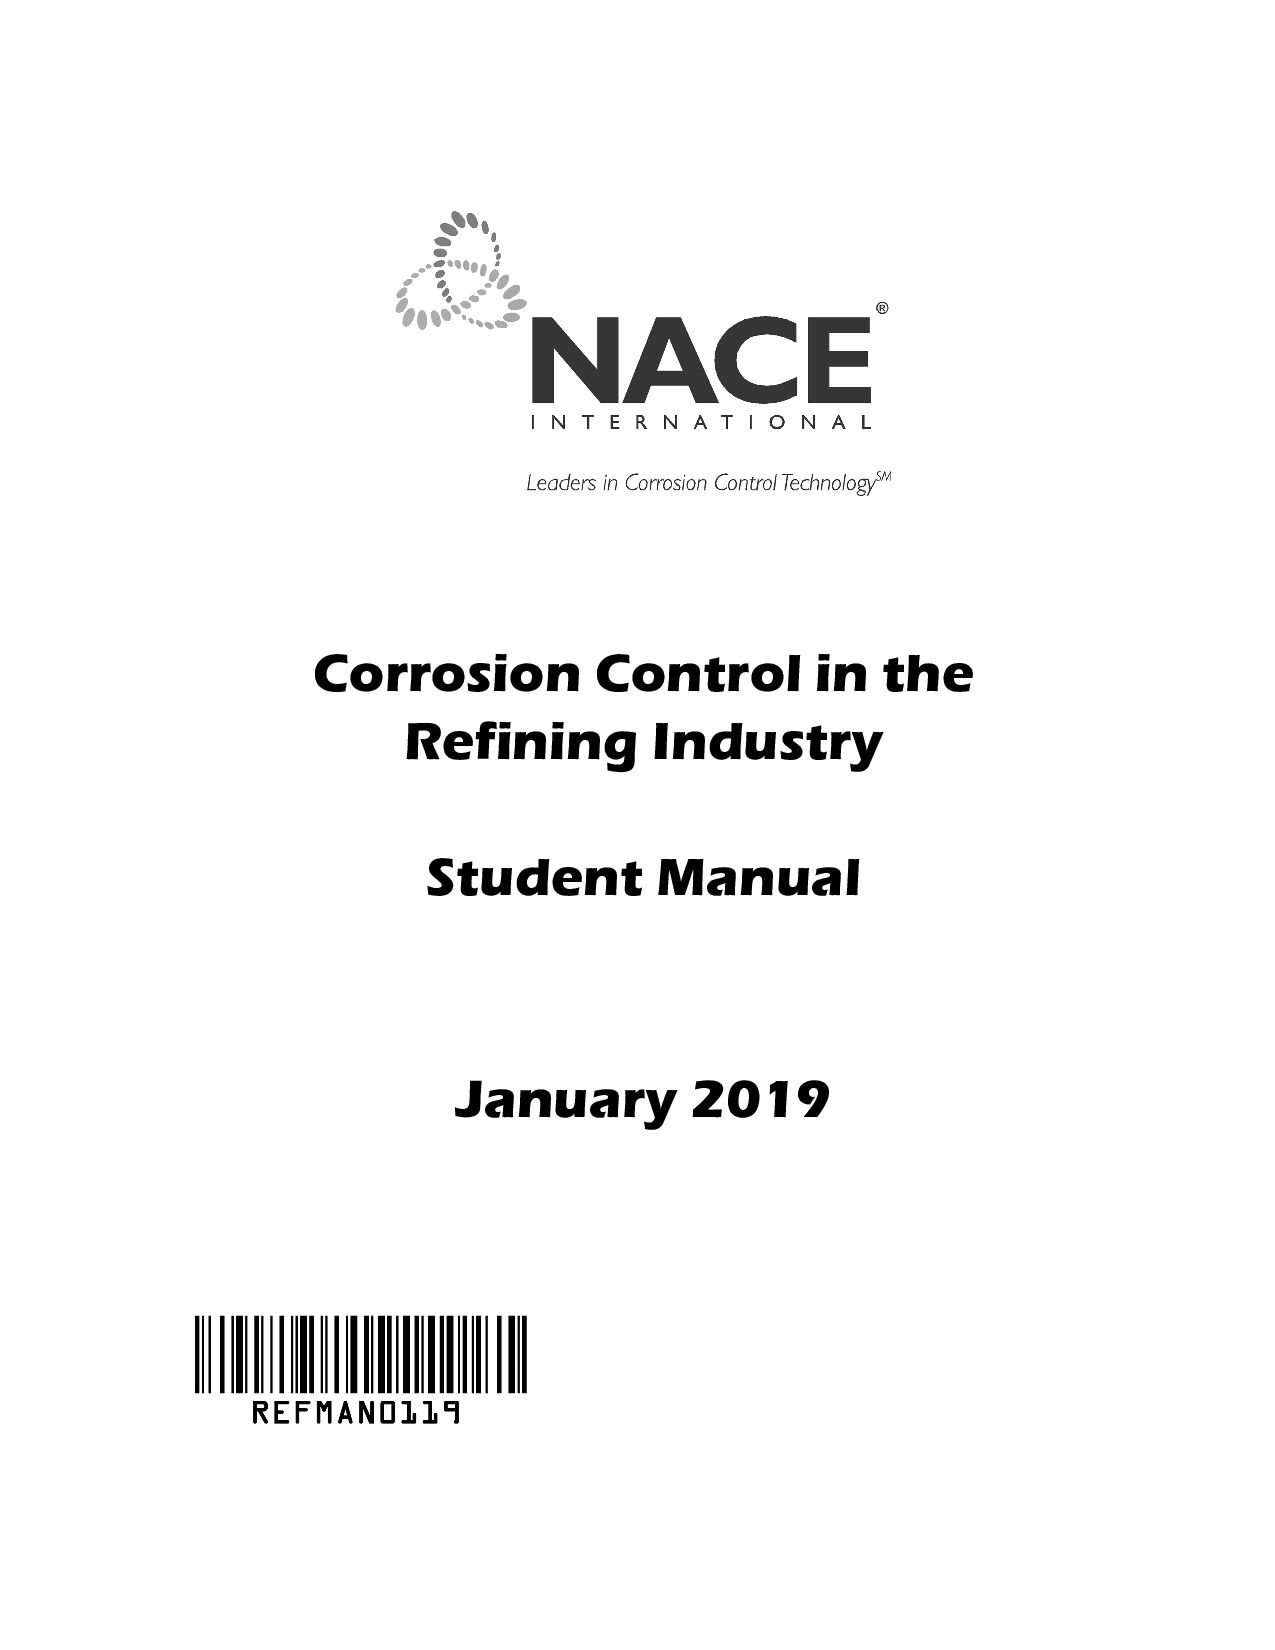 NACE Corrosion Control in the Refining Industry 2019封面图